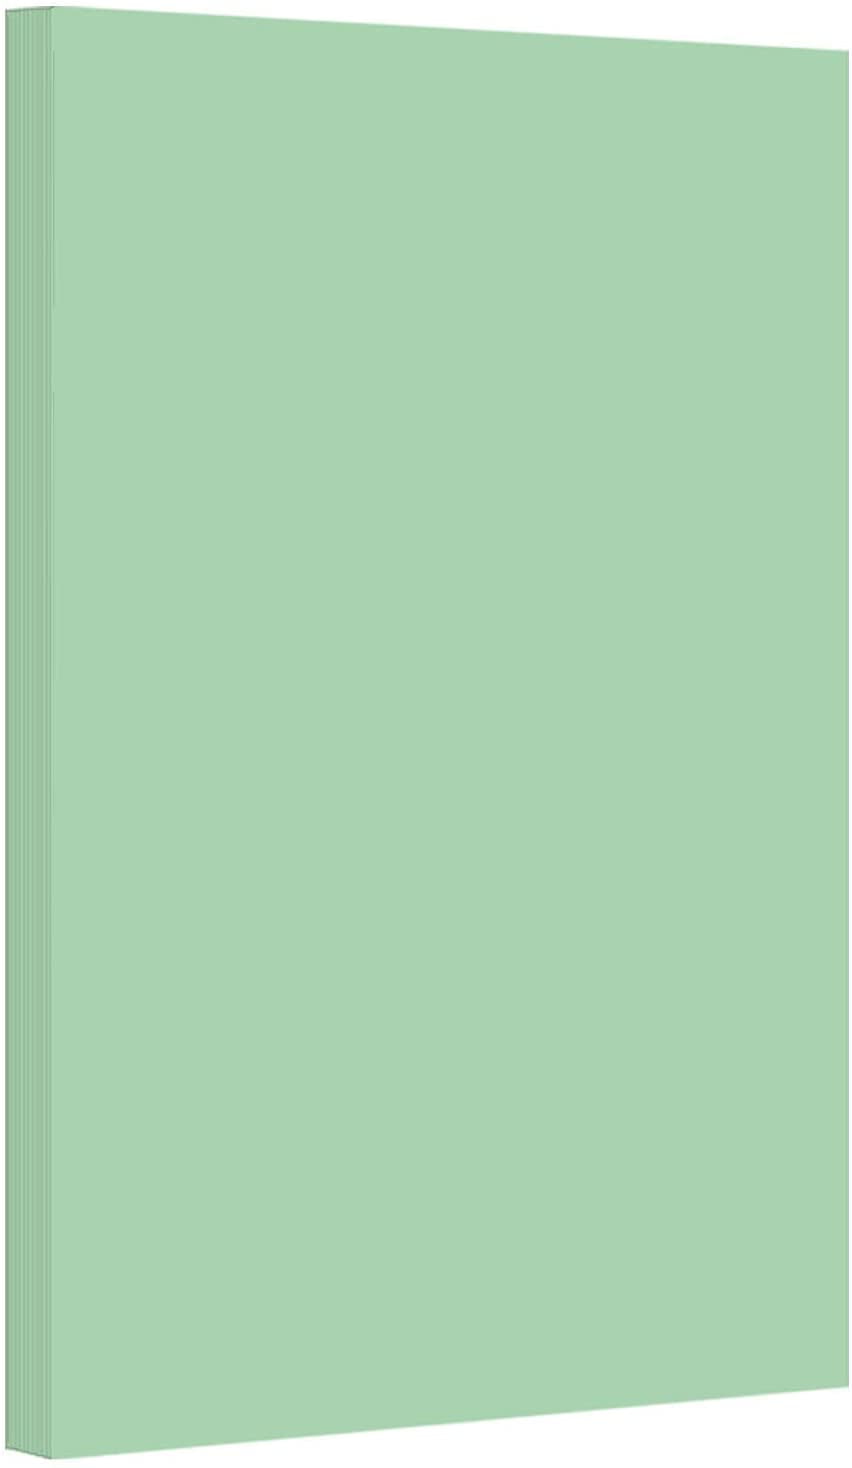 Ivory Pastel Colored Paper – 8.5 x 11 (Letter Size) – Perfect